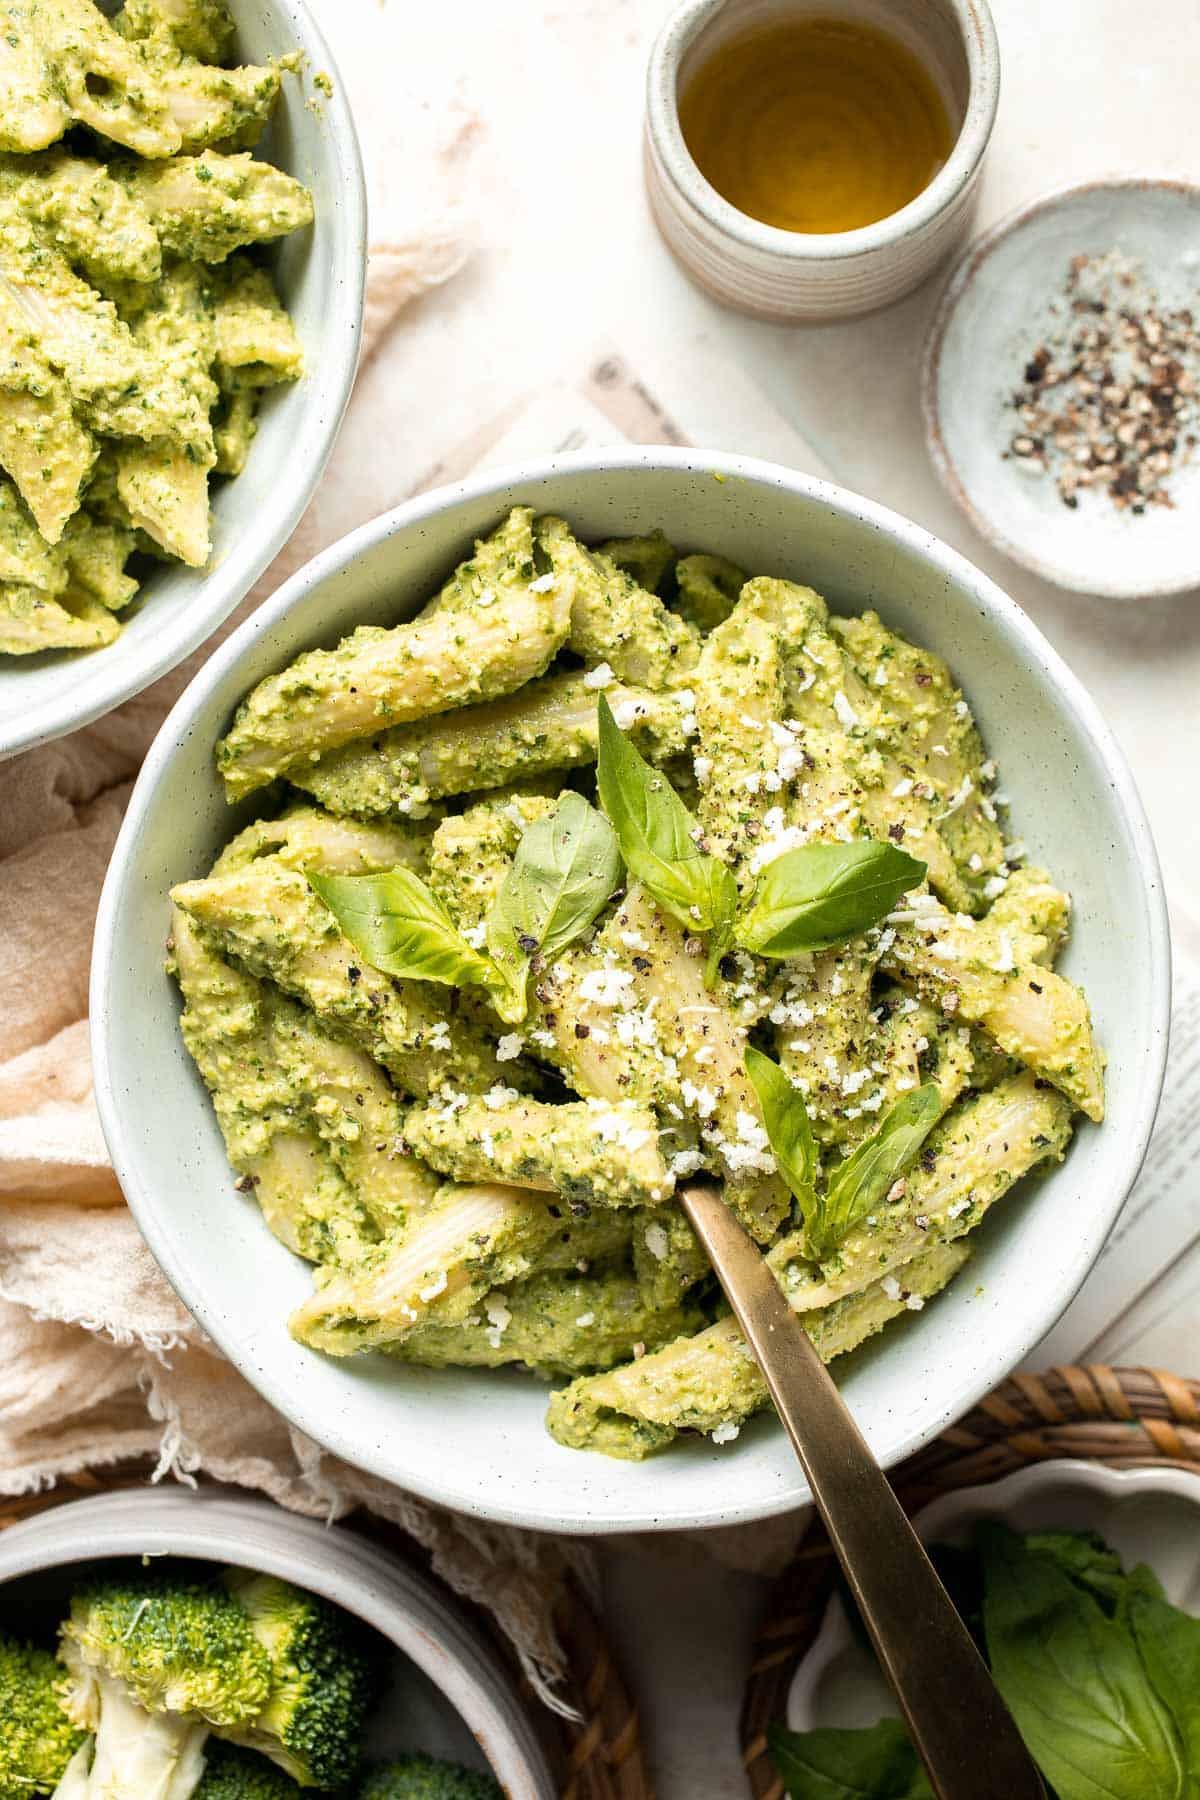 Broccoli Pesto Pasta is a fun twist on traditional pesto sauce and is ready to serve in under 30 minutes. It's a great way to serve some extra veggies! | aheadofthyme.com